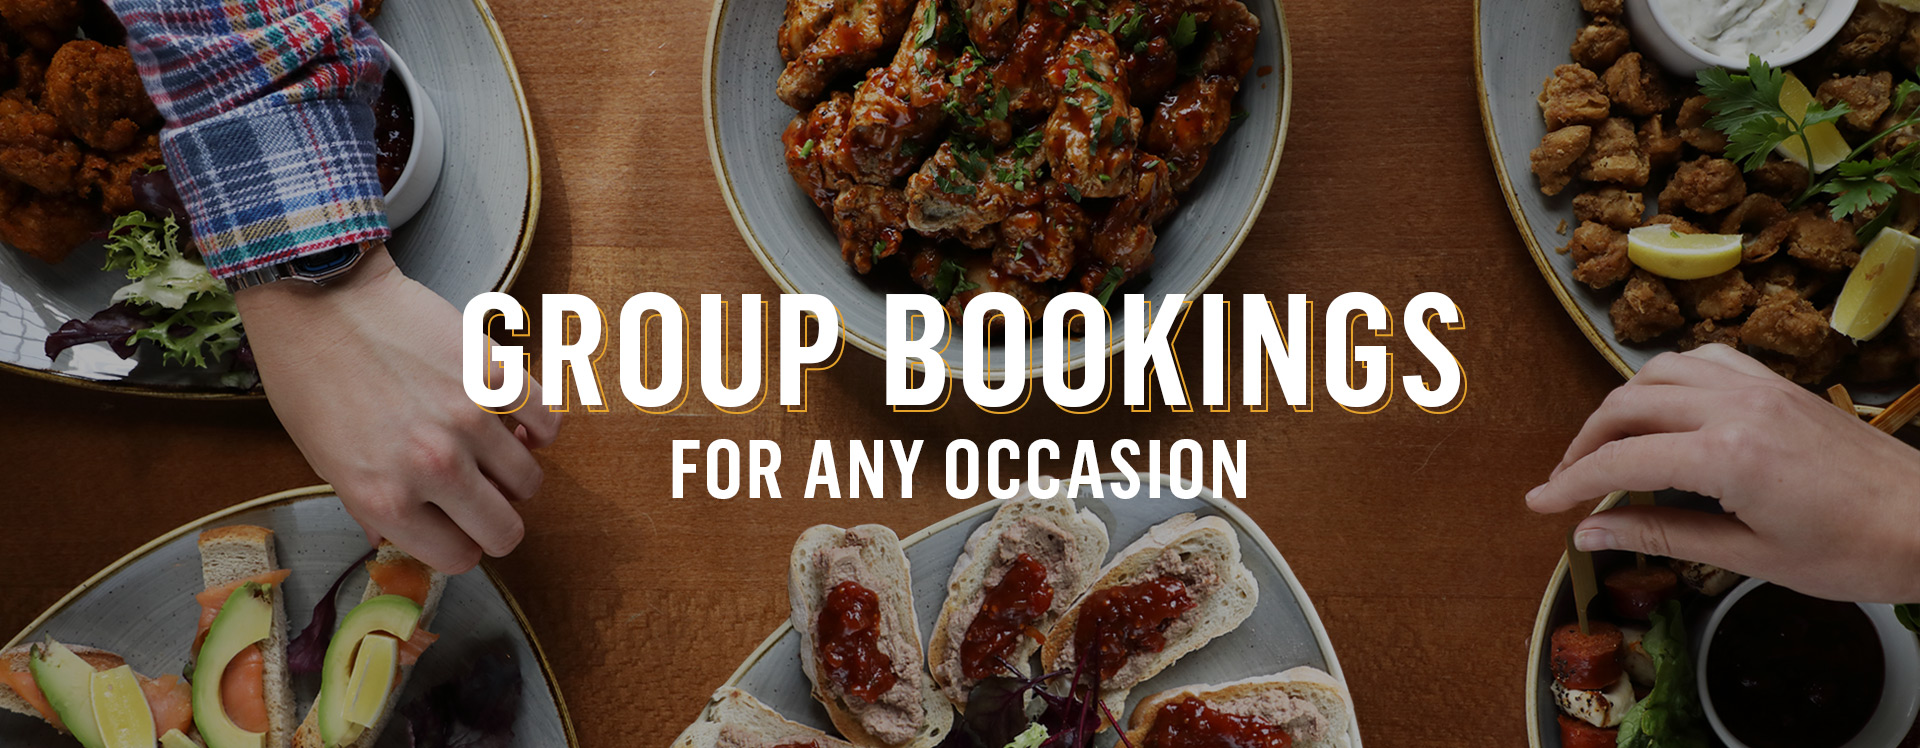 Group Bookings at The Pump House